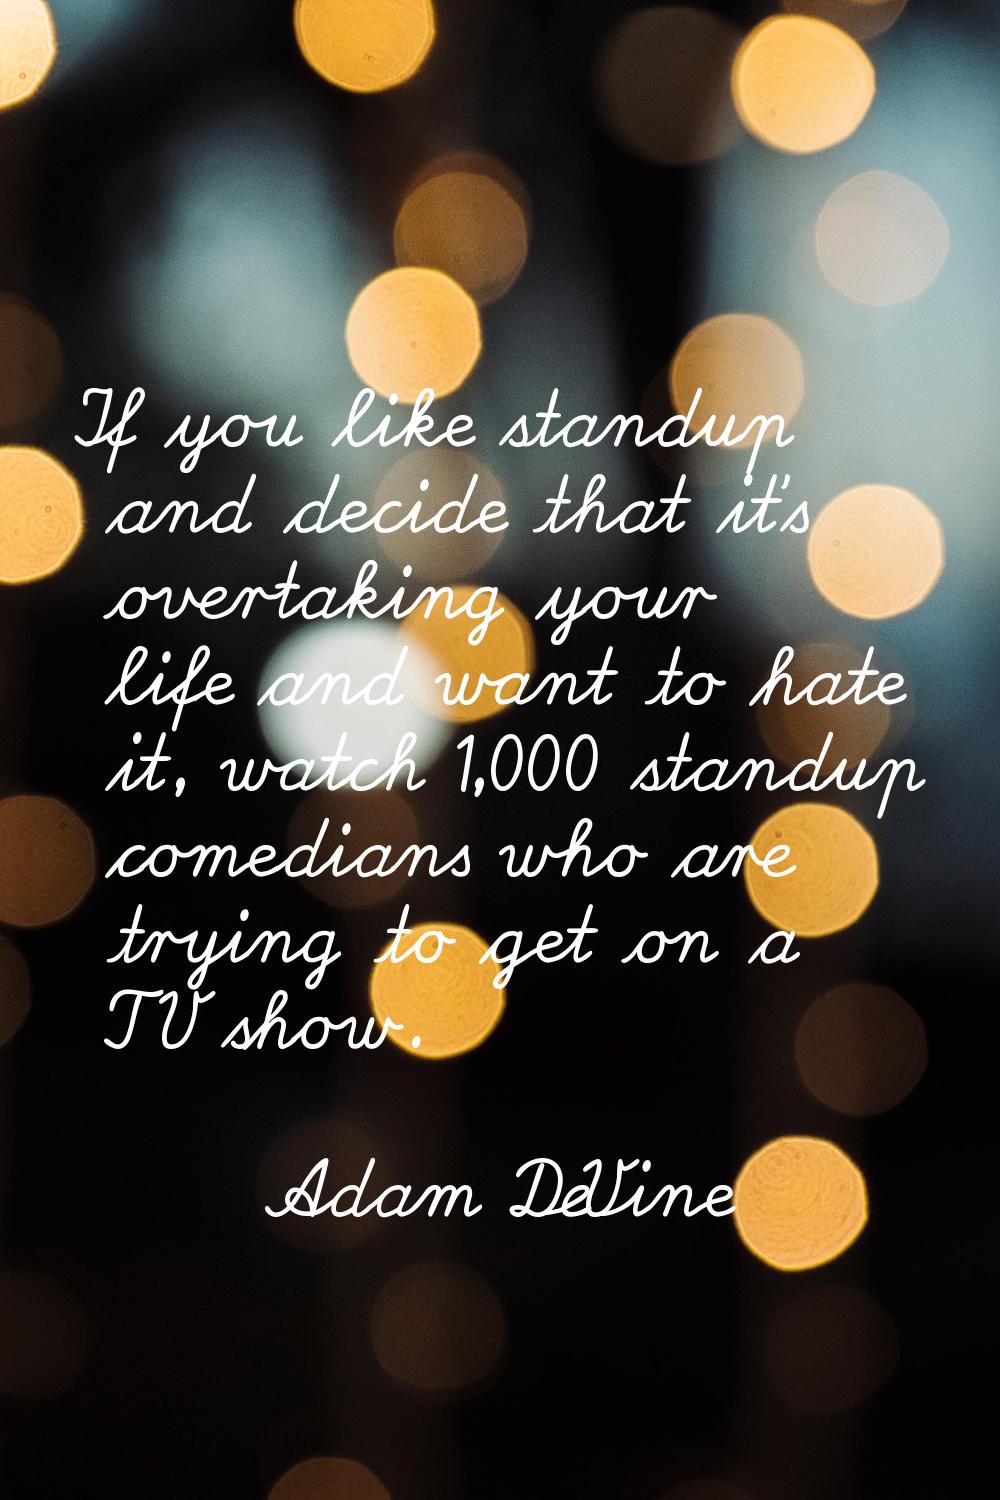 If you like standup and decide that it's overtaking your life and want to hate it, watch 1,000 stan